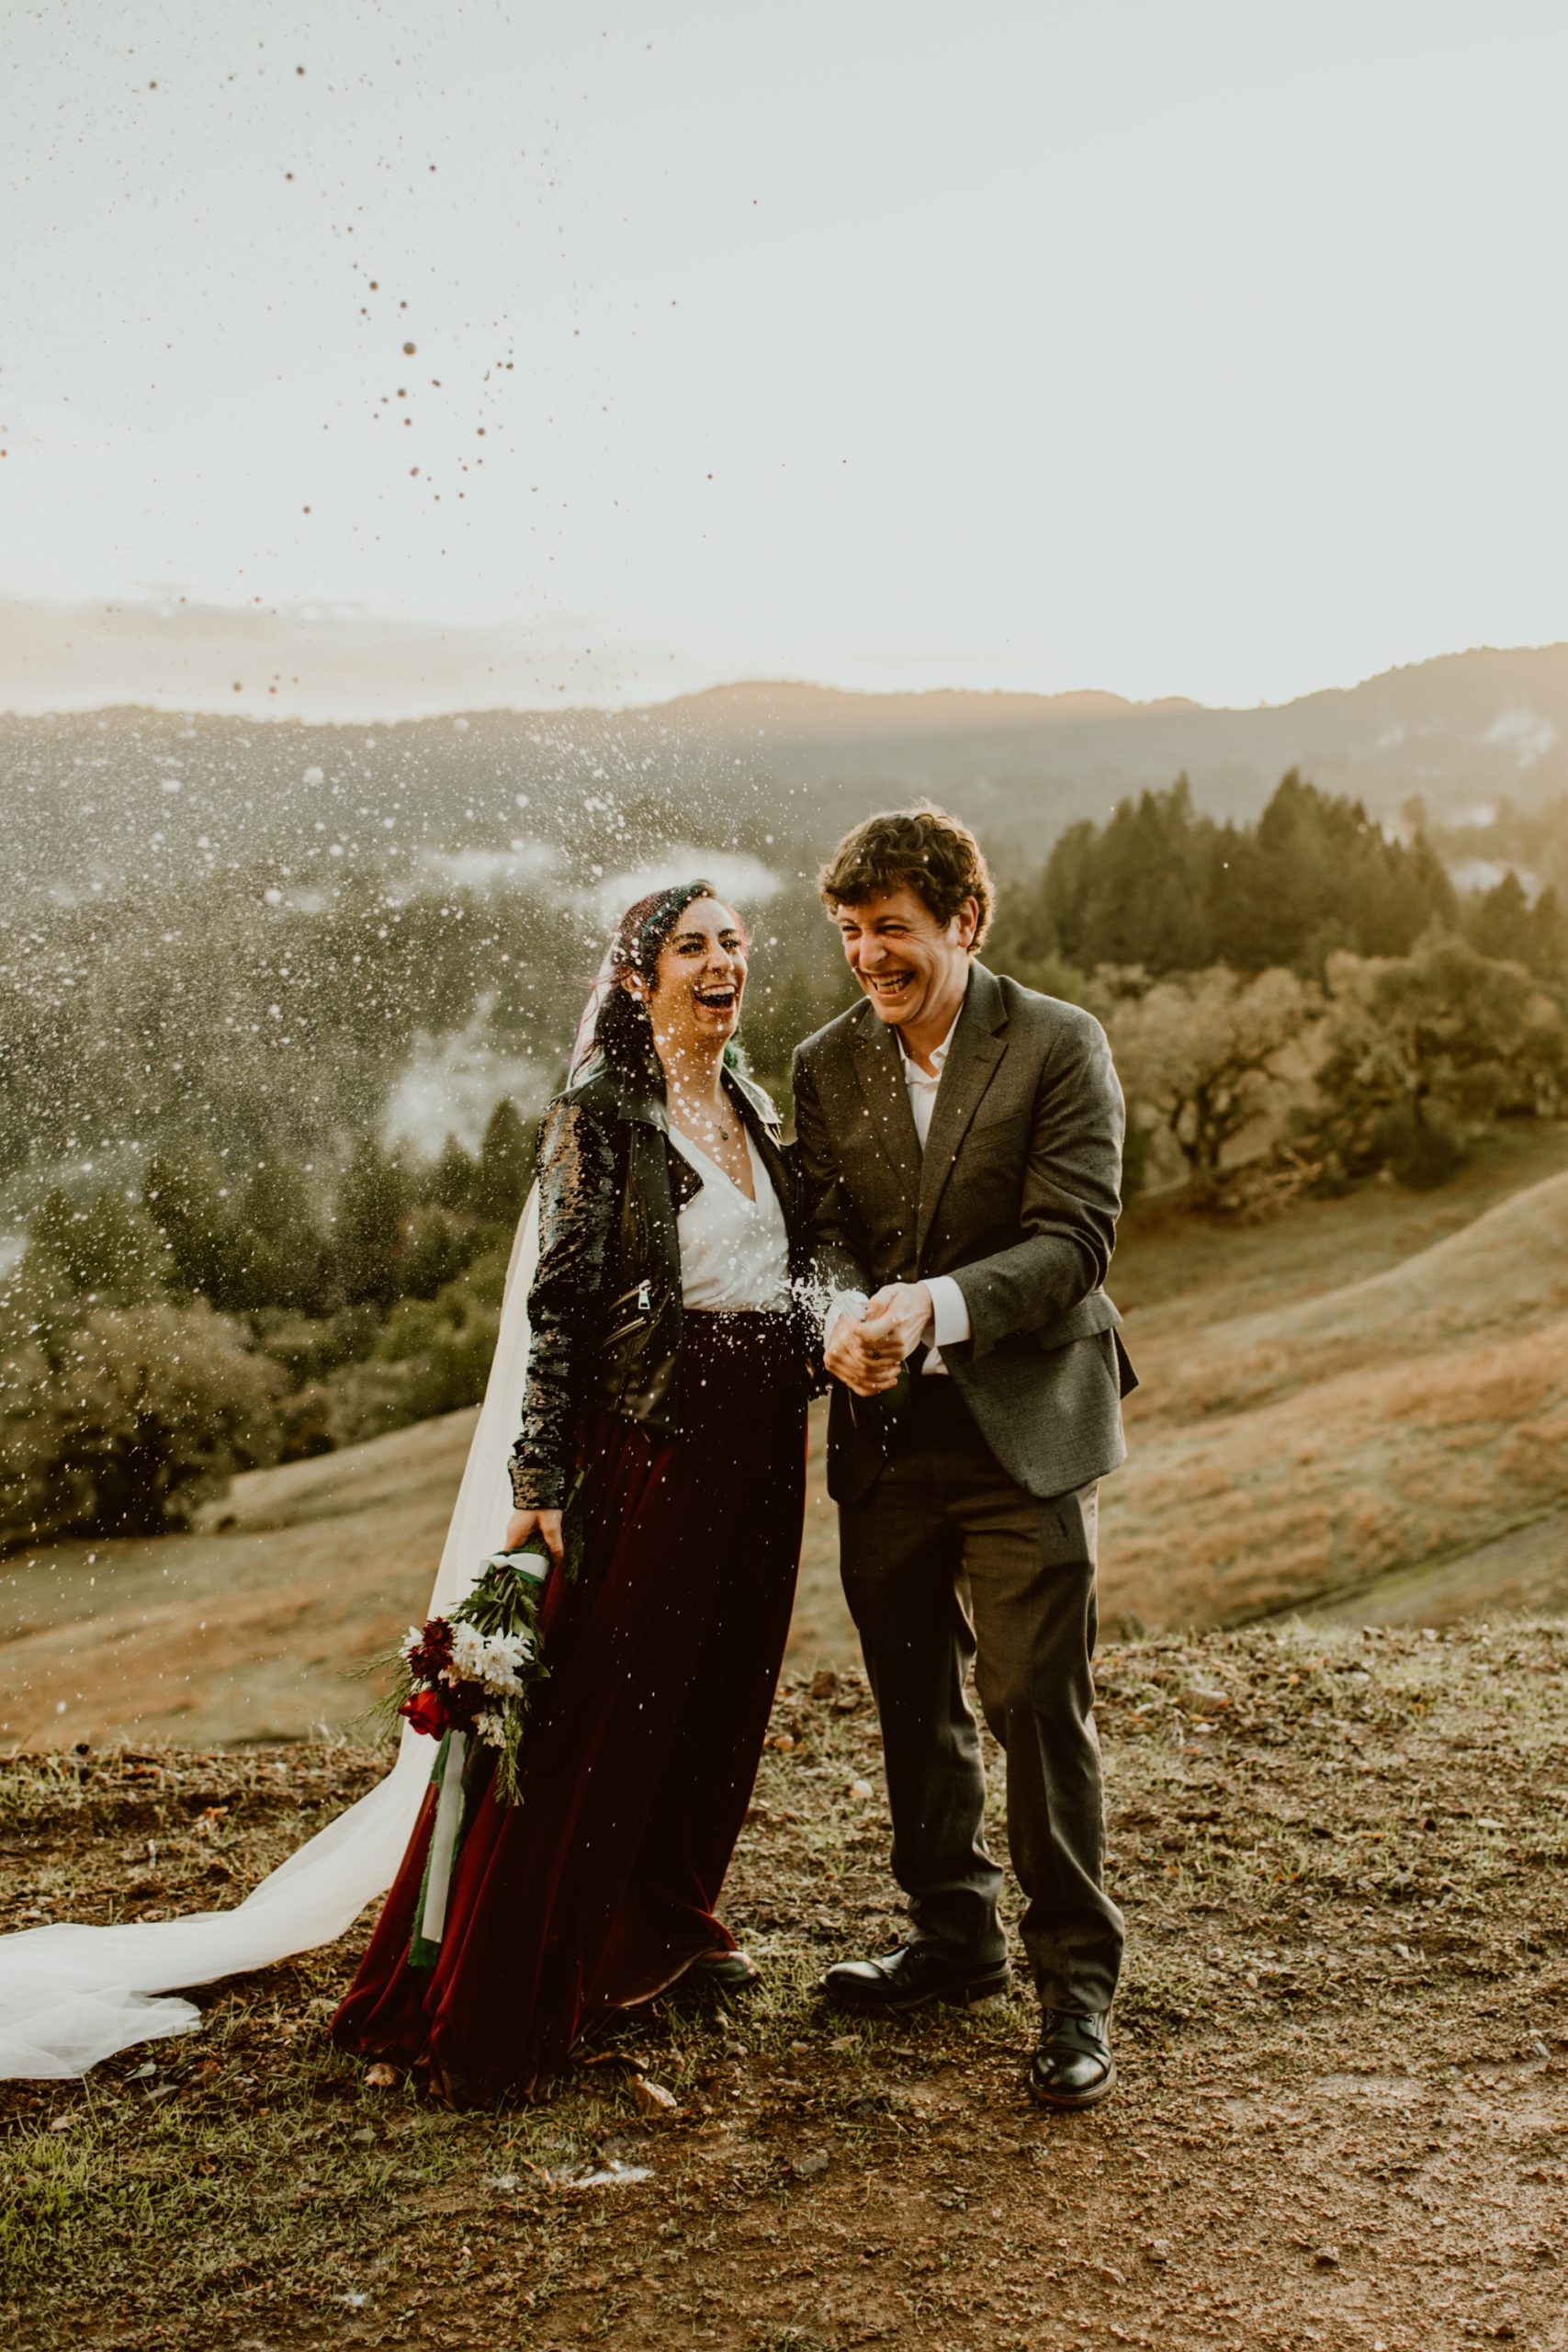 If you're worried about rain on your wedding day, check out this post documenting a rainy day mountain elopement for inspo!